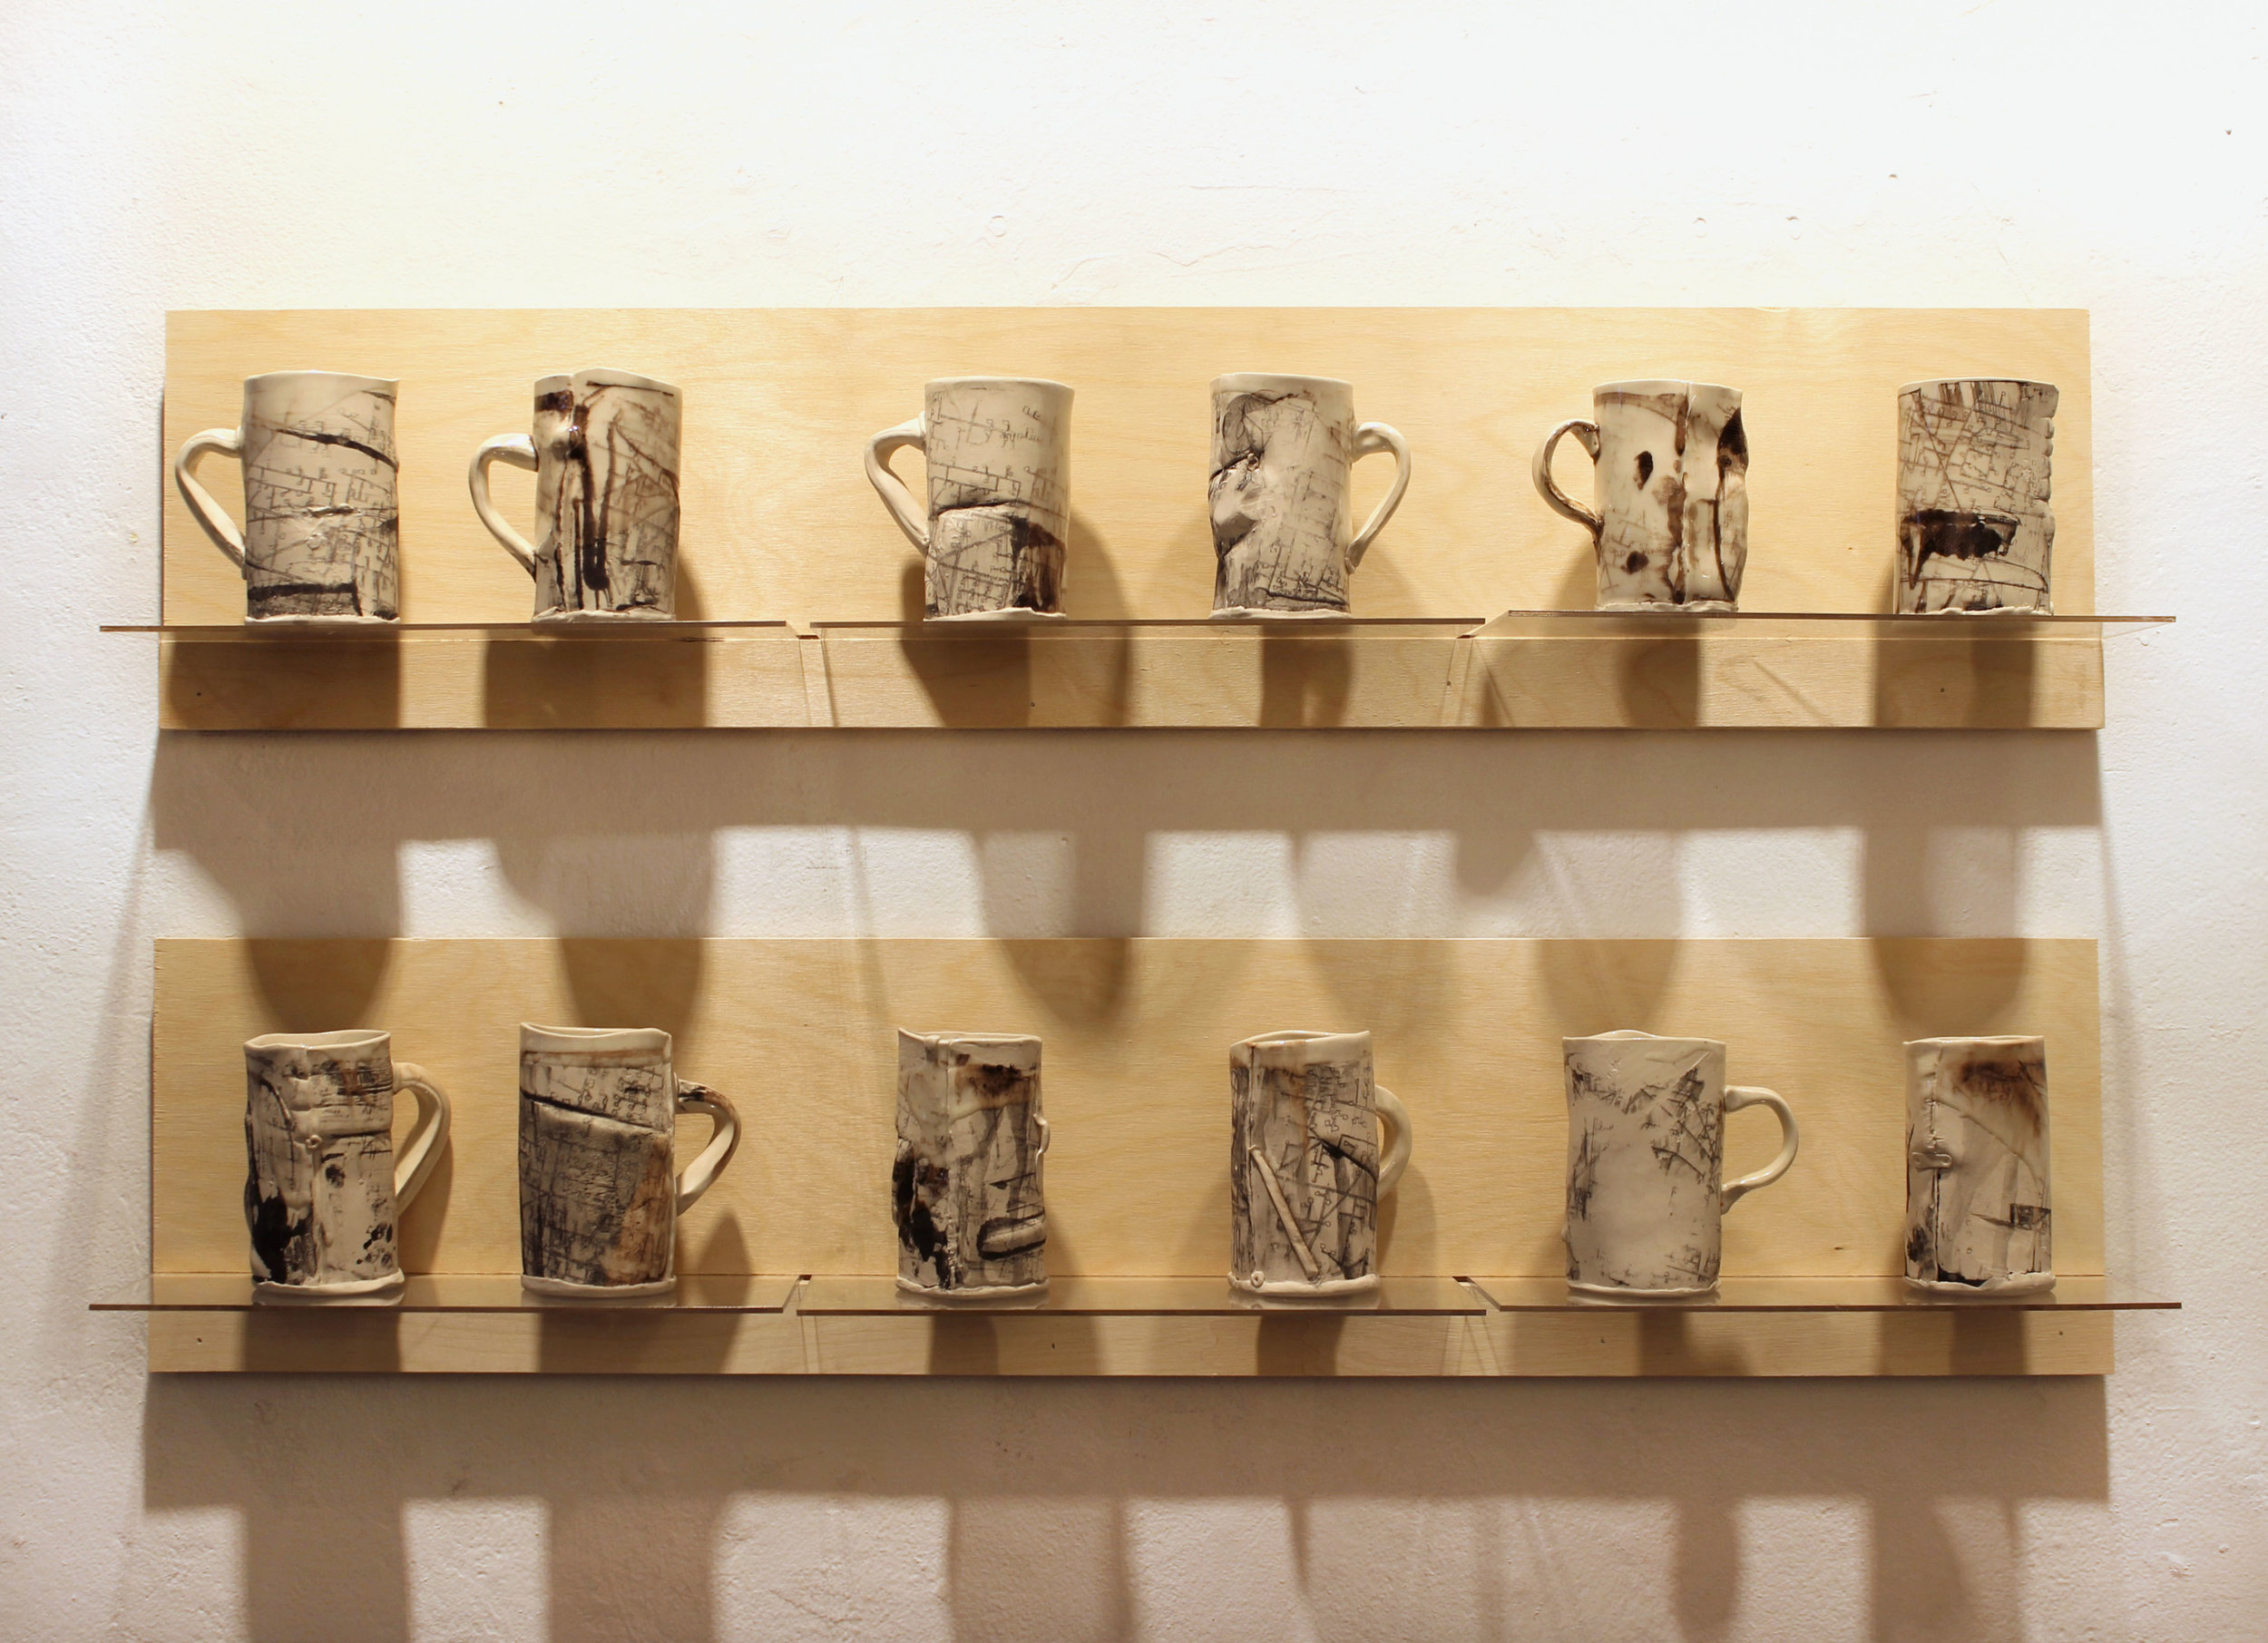 Cups from the Crude Instillation